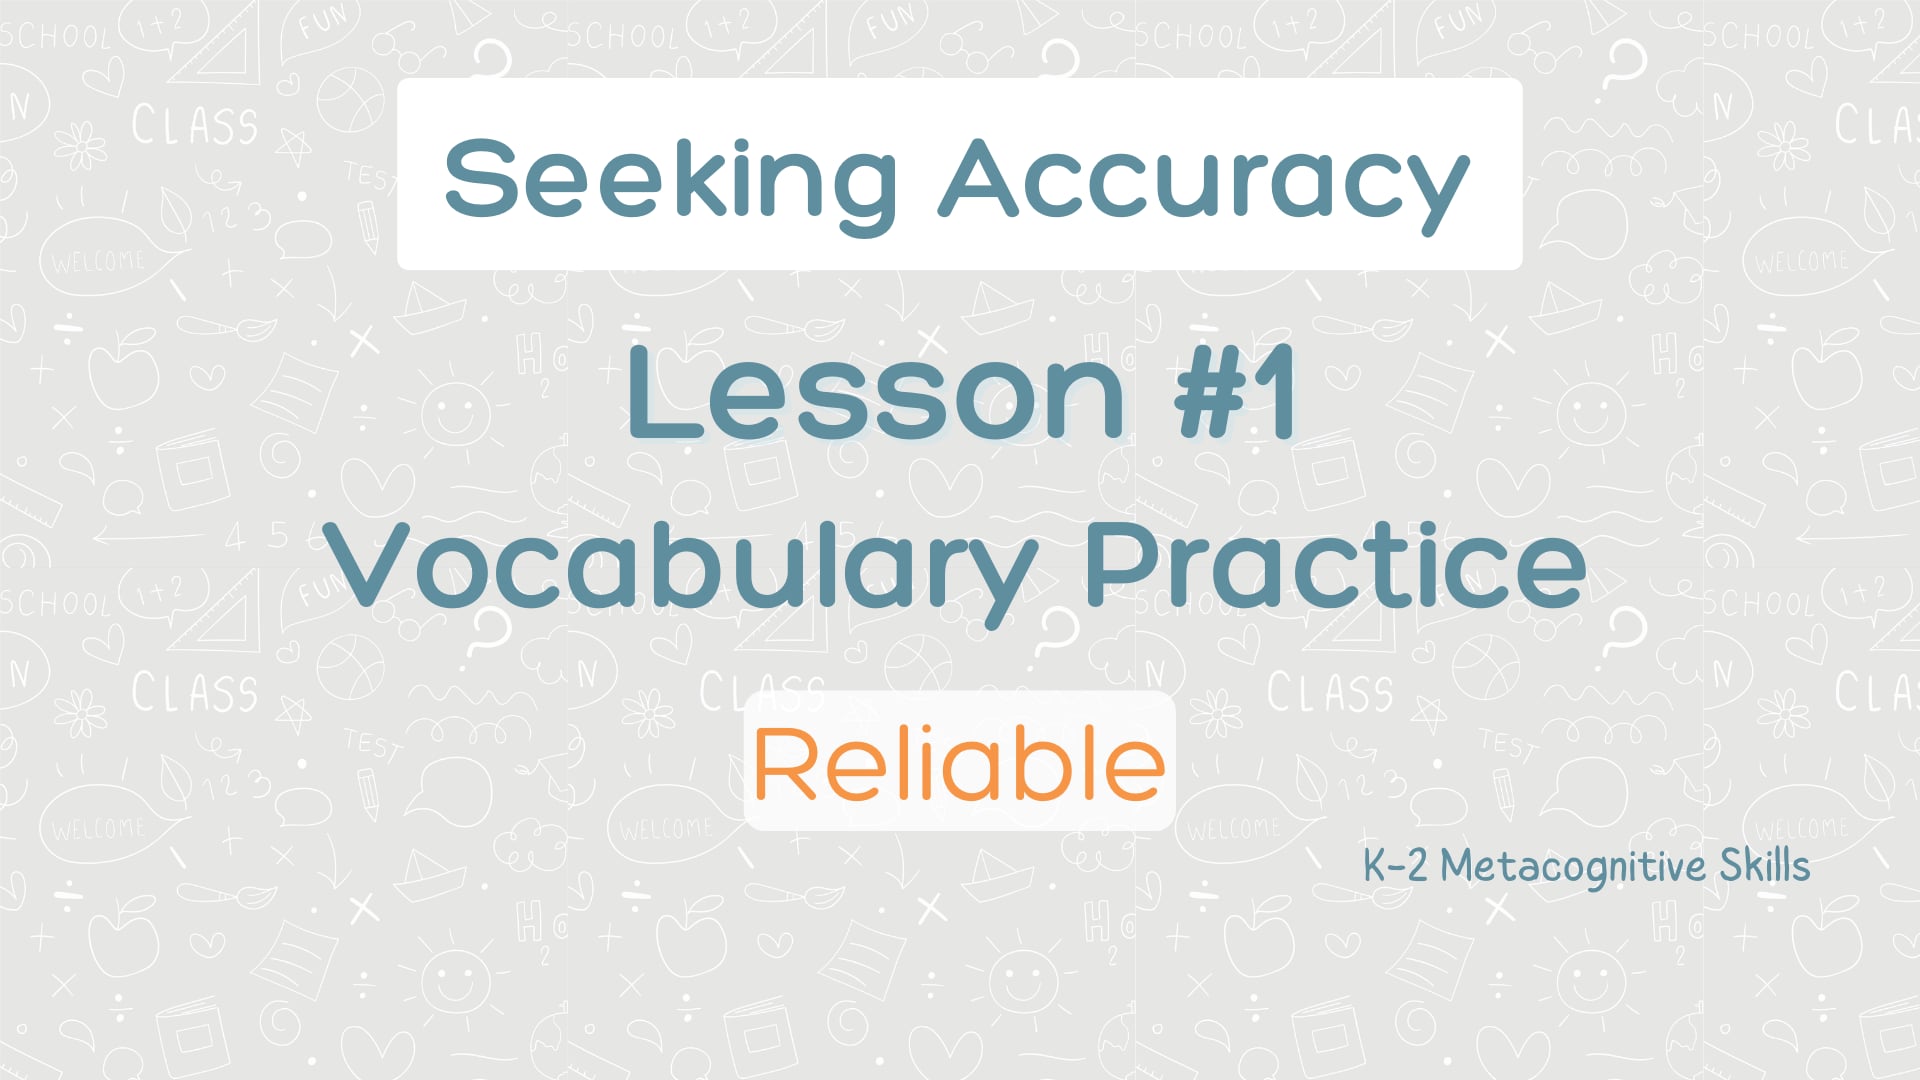 Lesson #1 Vocabulary Practice: Reliable video thumbnail